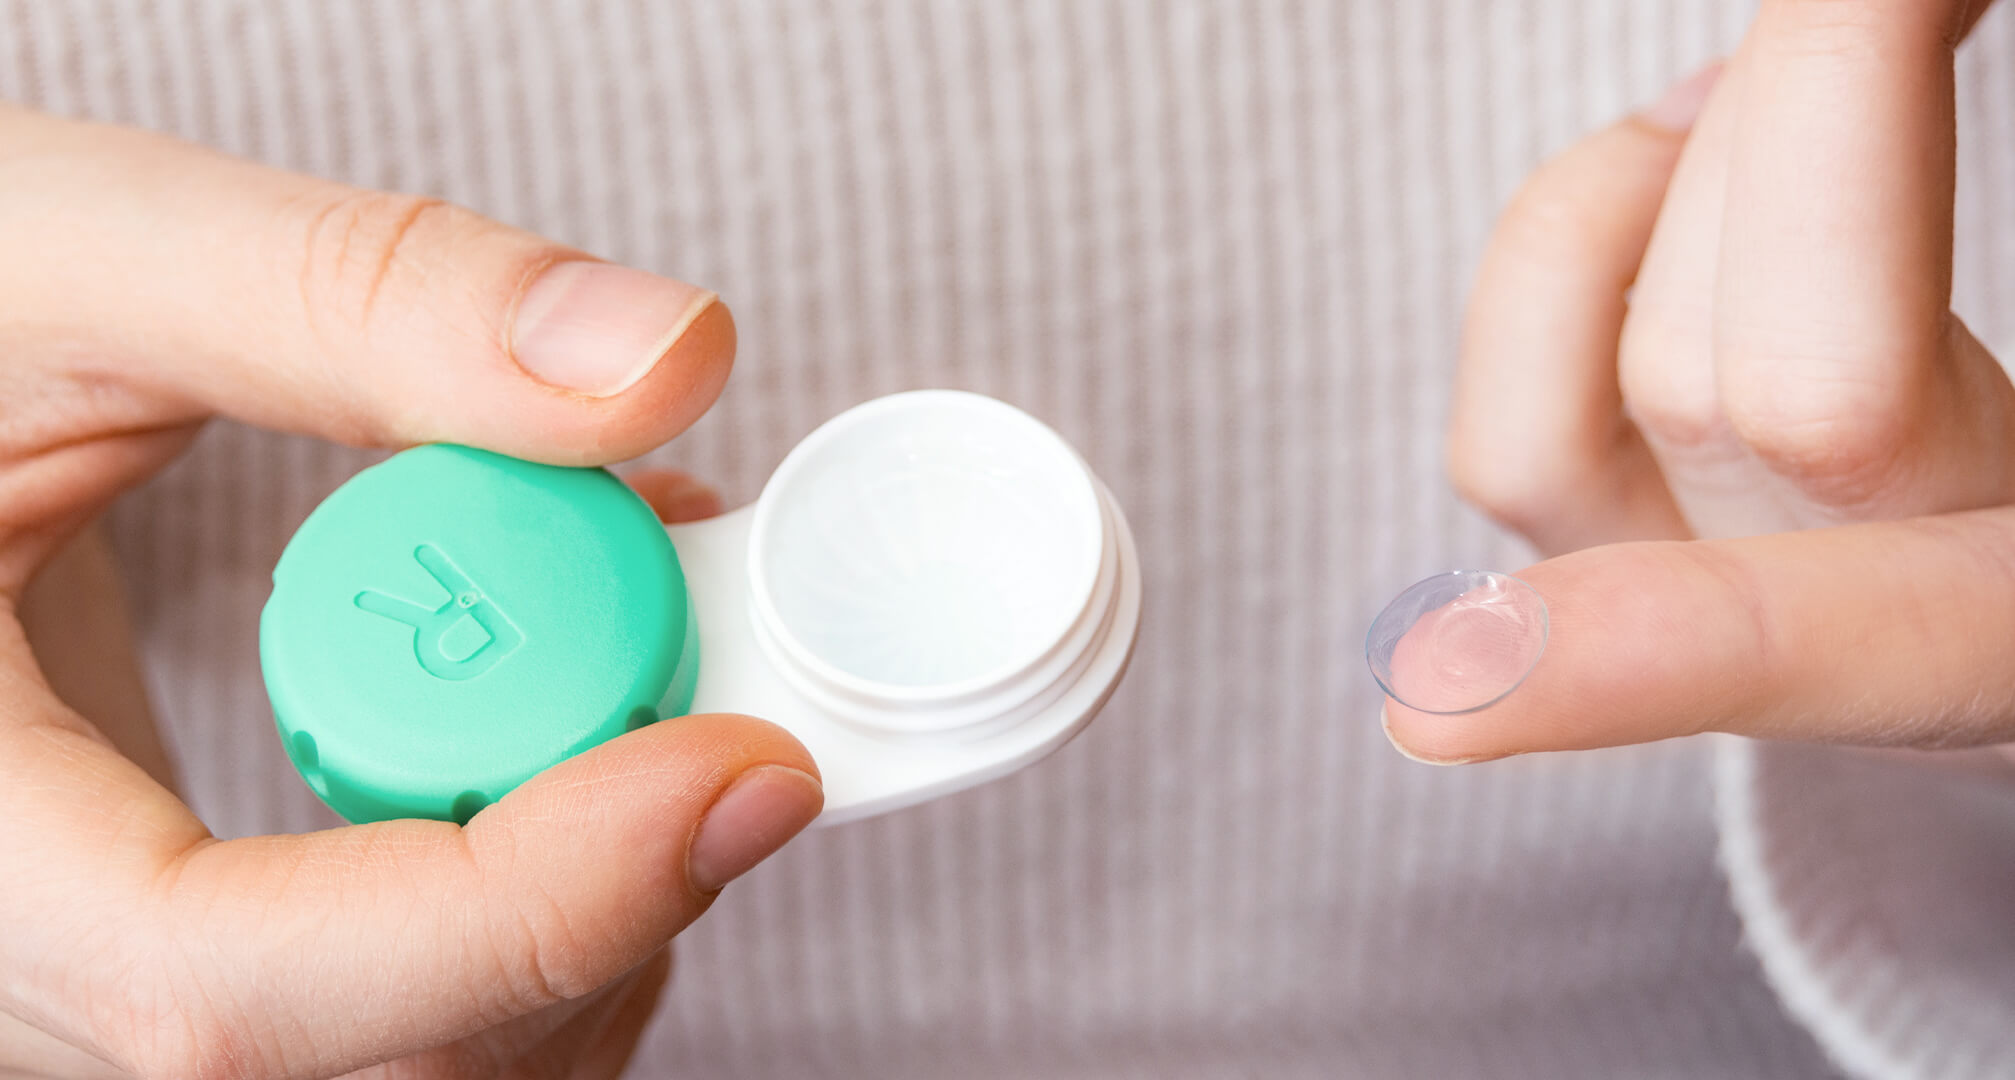 Contact lens and contact lens case